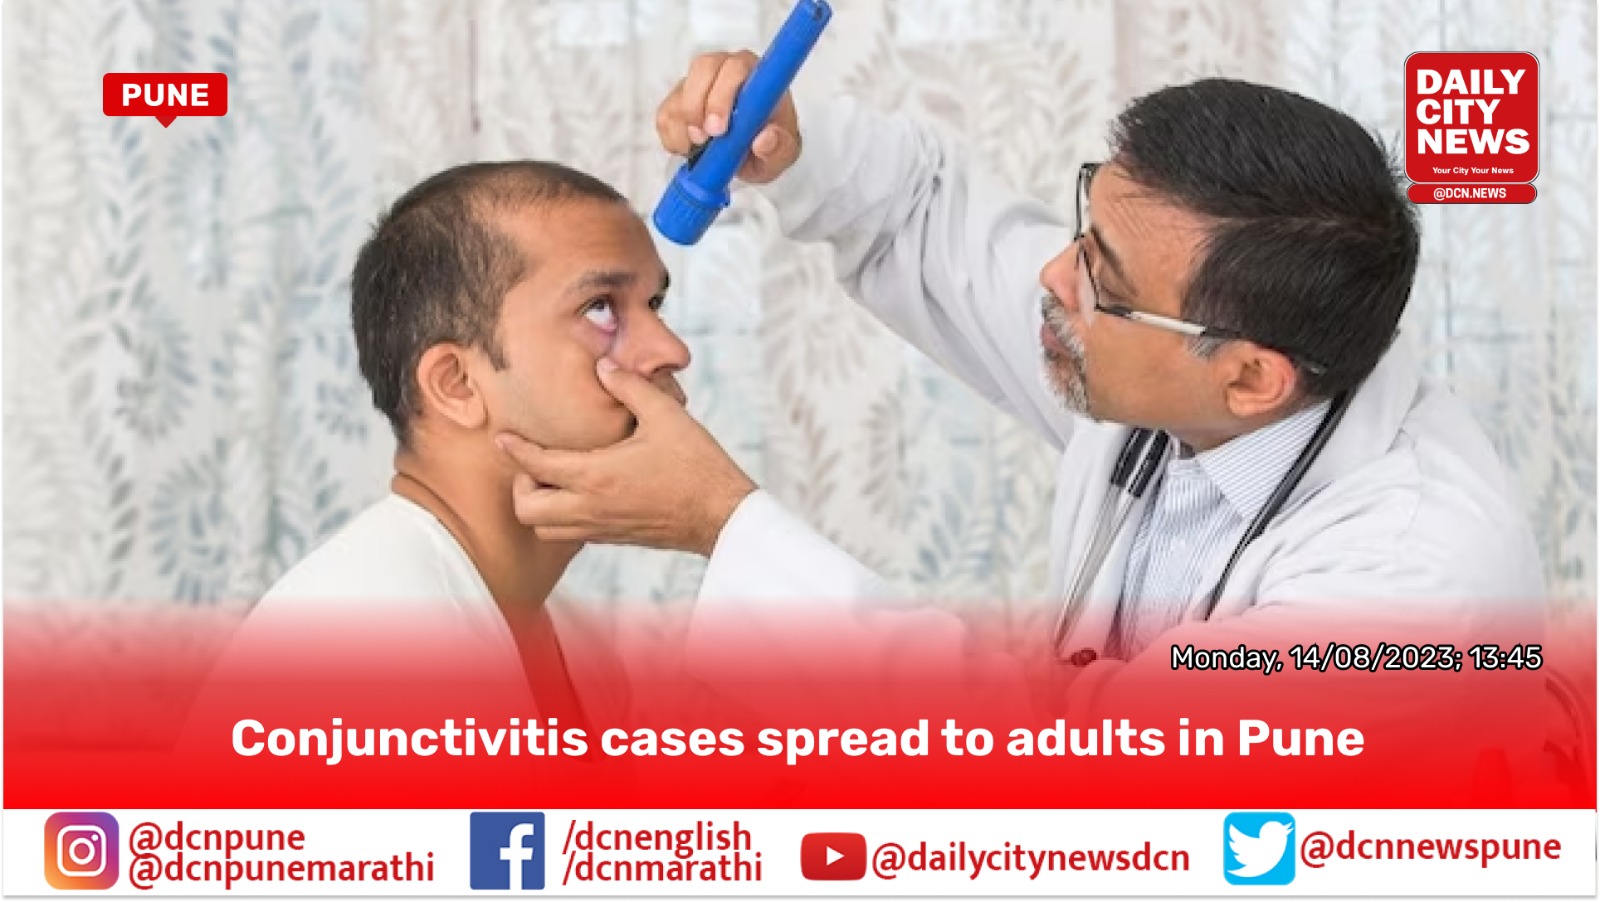 Conjunctivitis cases spread to adults in Pune